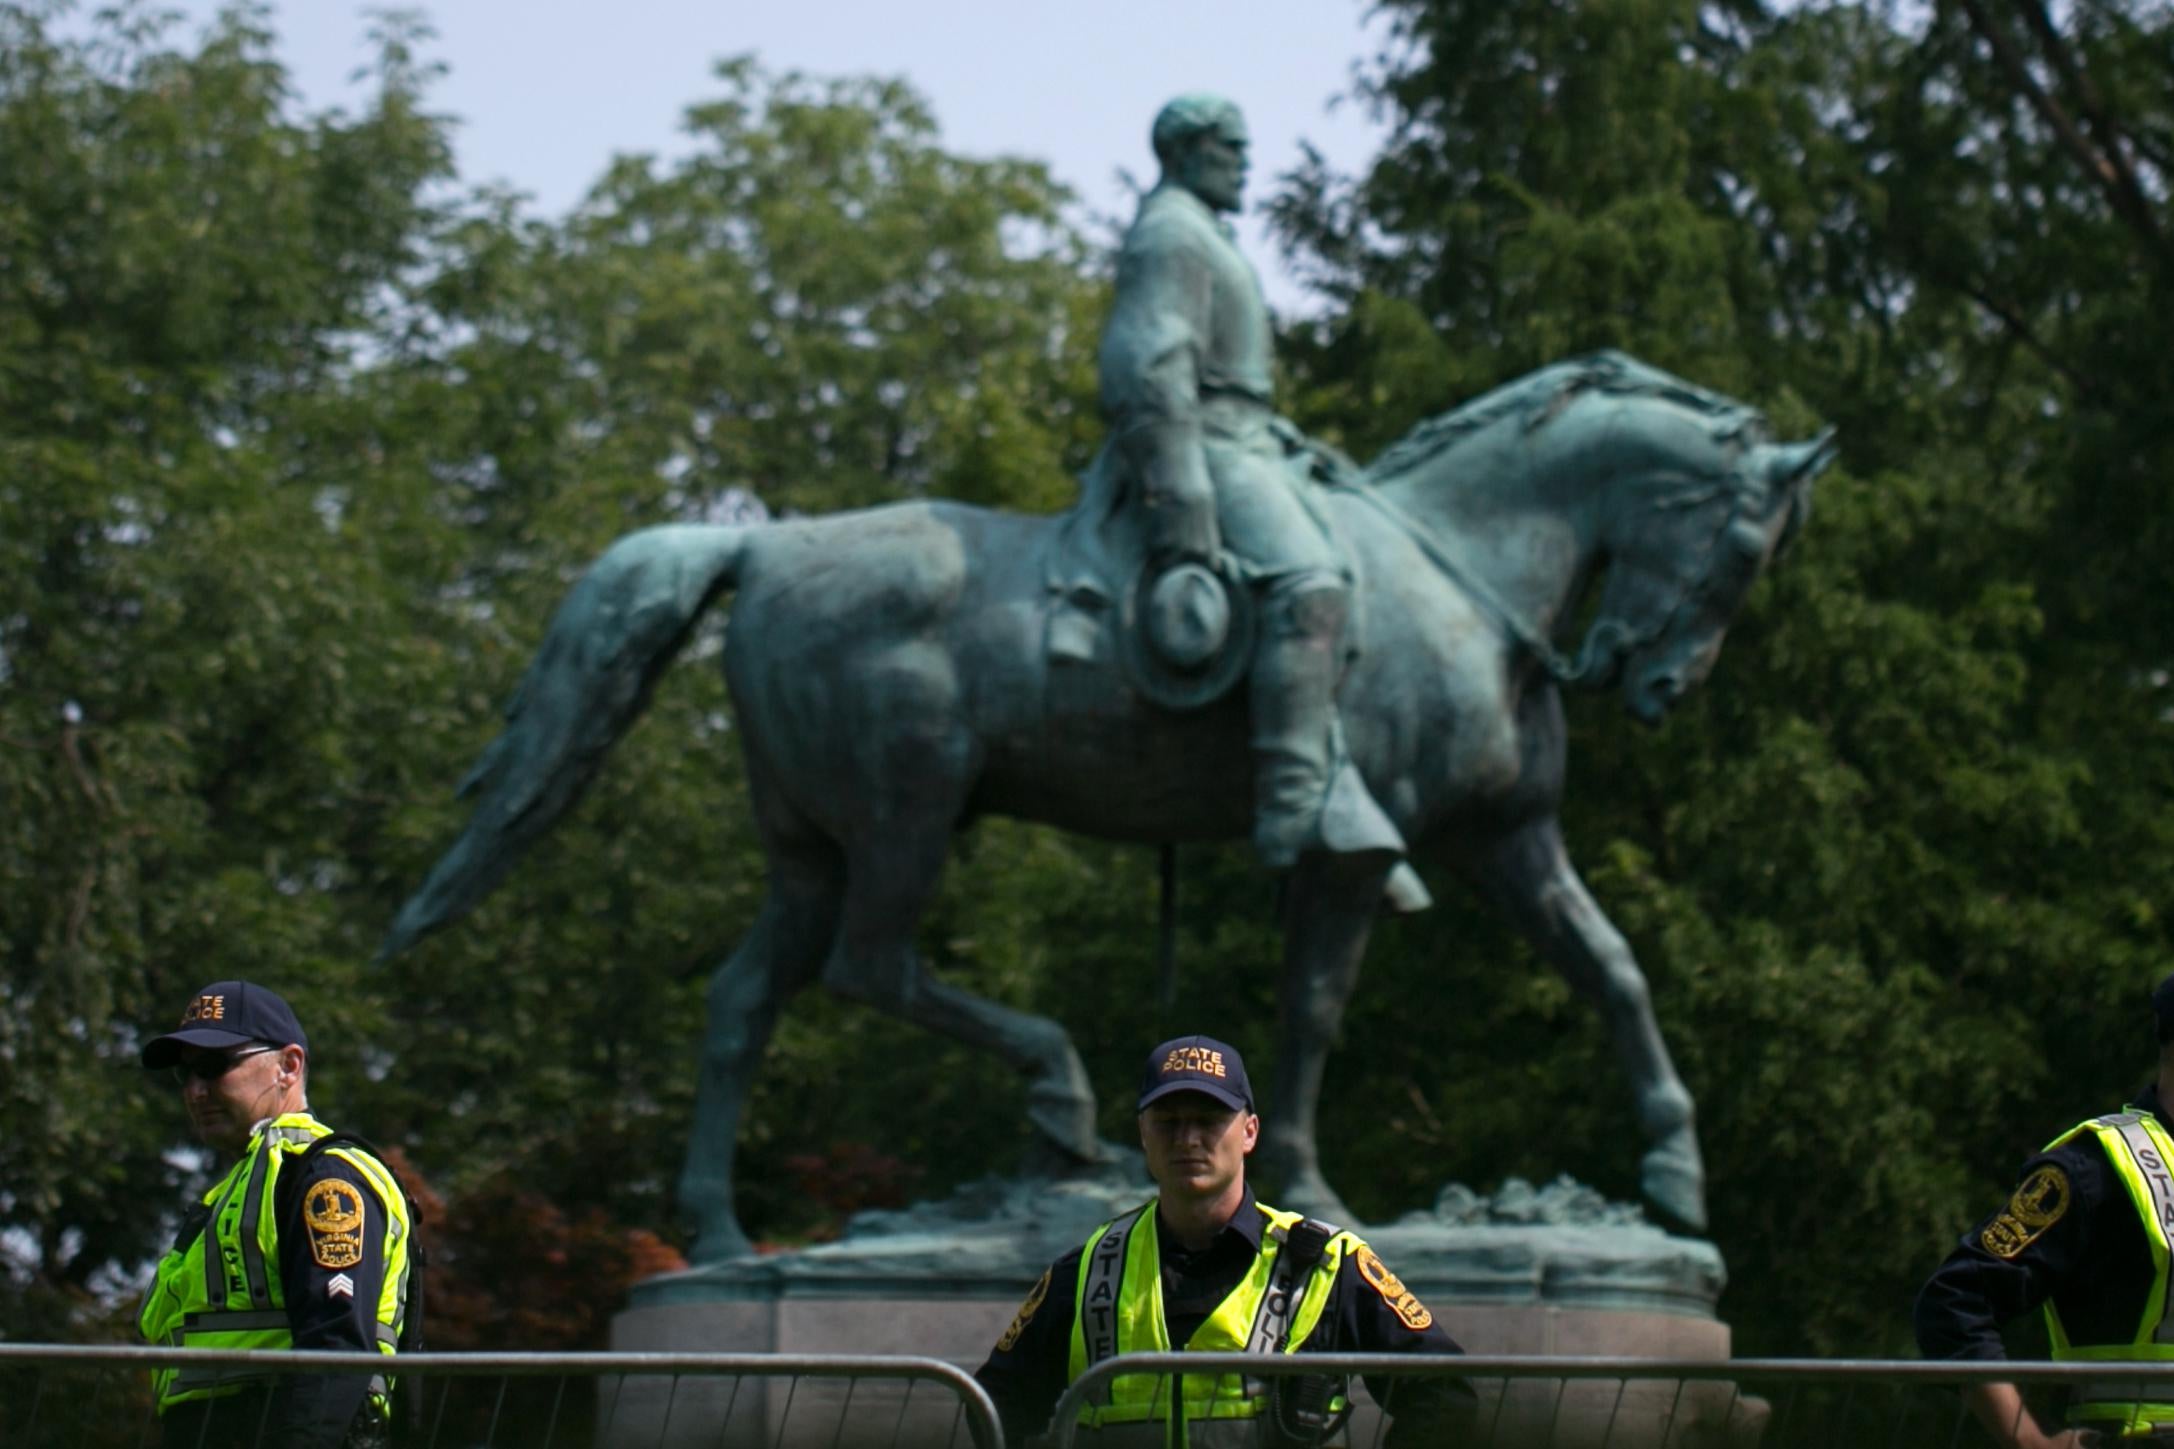 Three officers wearing neon safety vests stand in front of the Lee statue on a sunny day